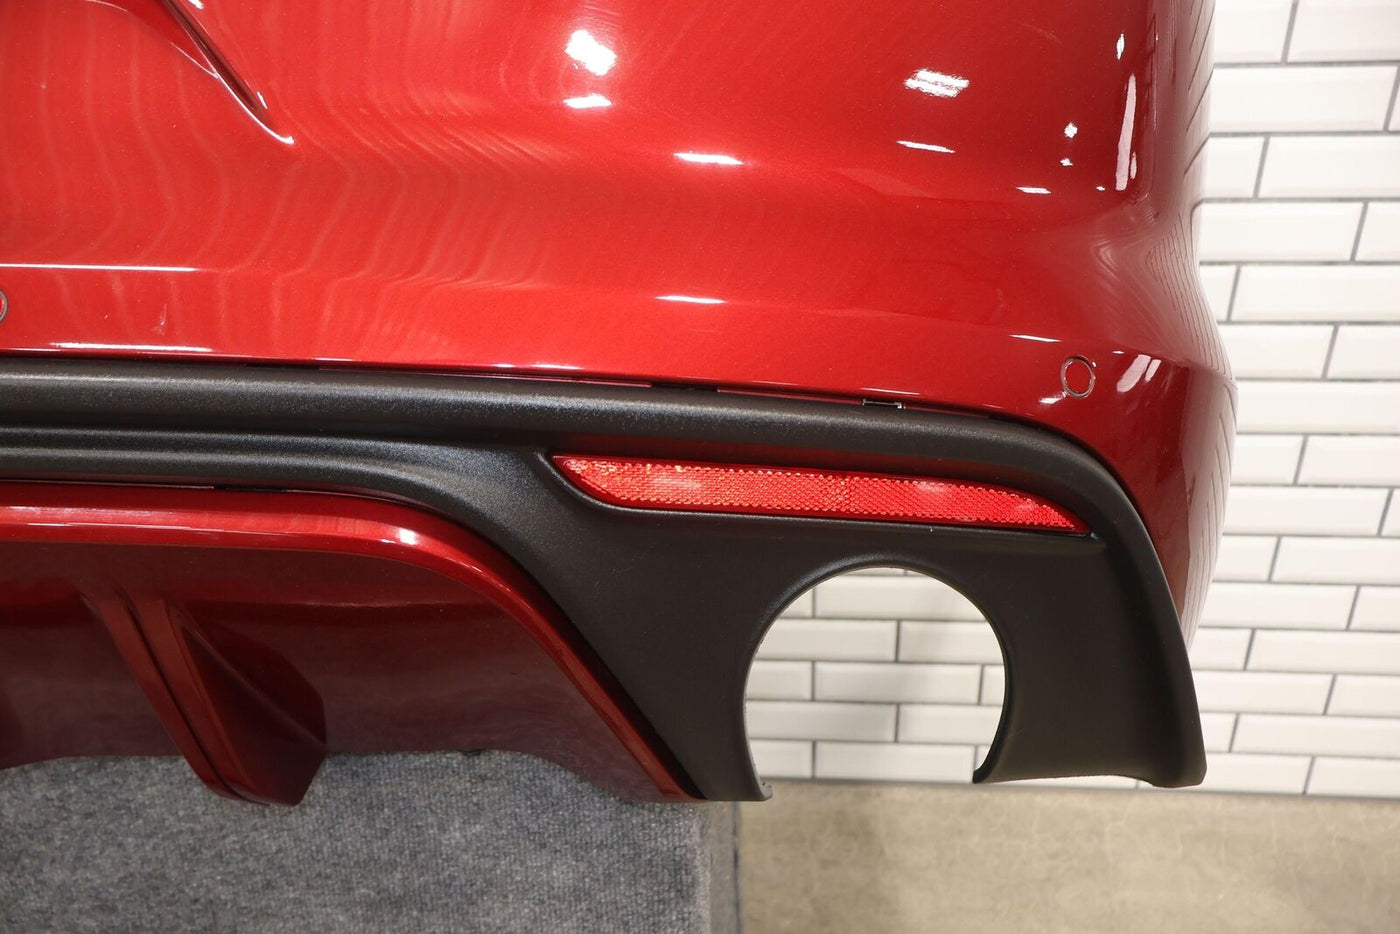 15-20 Ford Mustang GT Coupe Rear Bumper W/ Park Assist (Ruby Red Metallic RR)